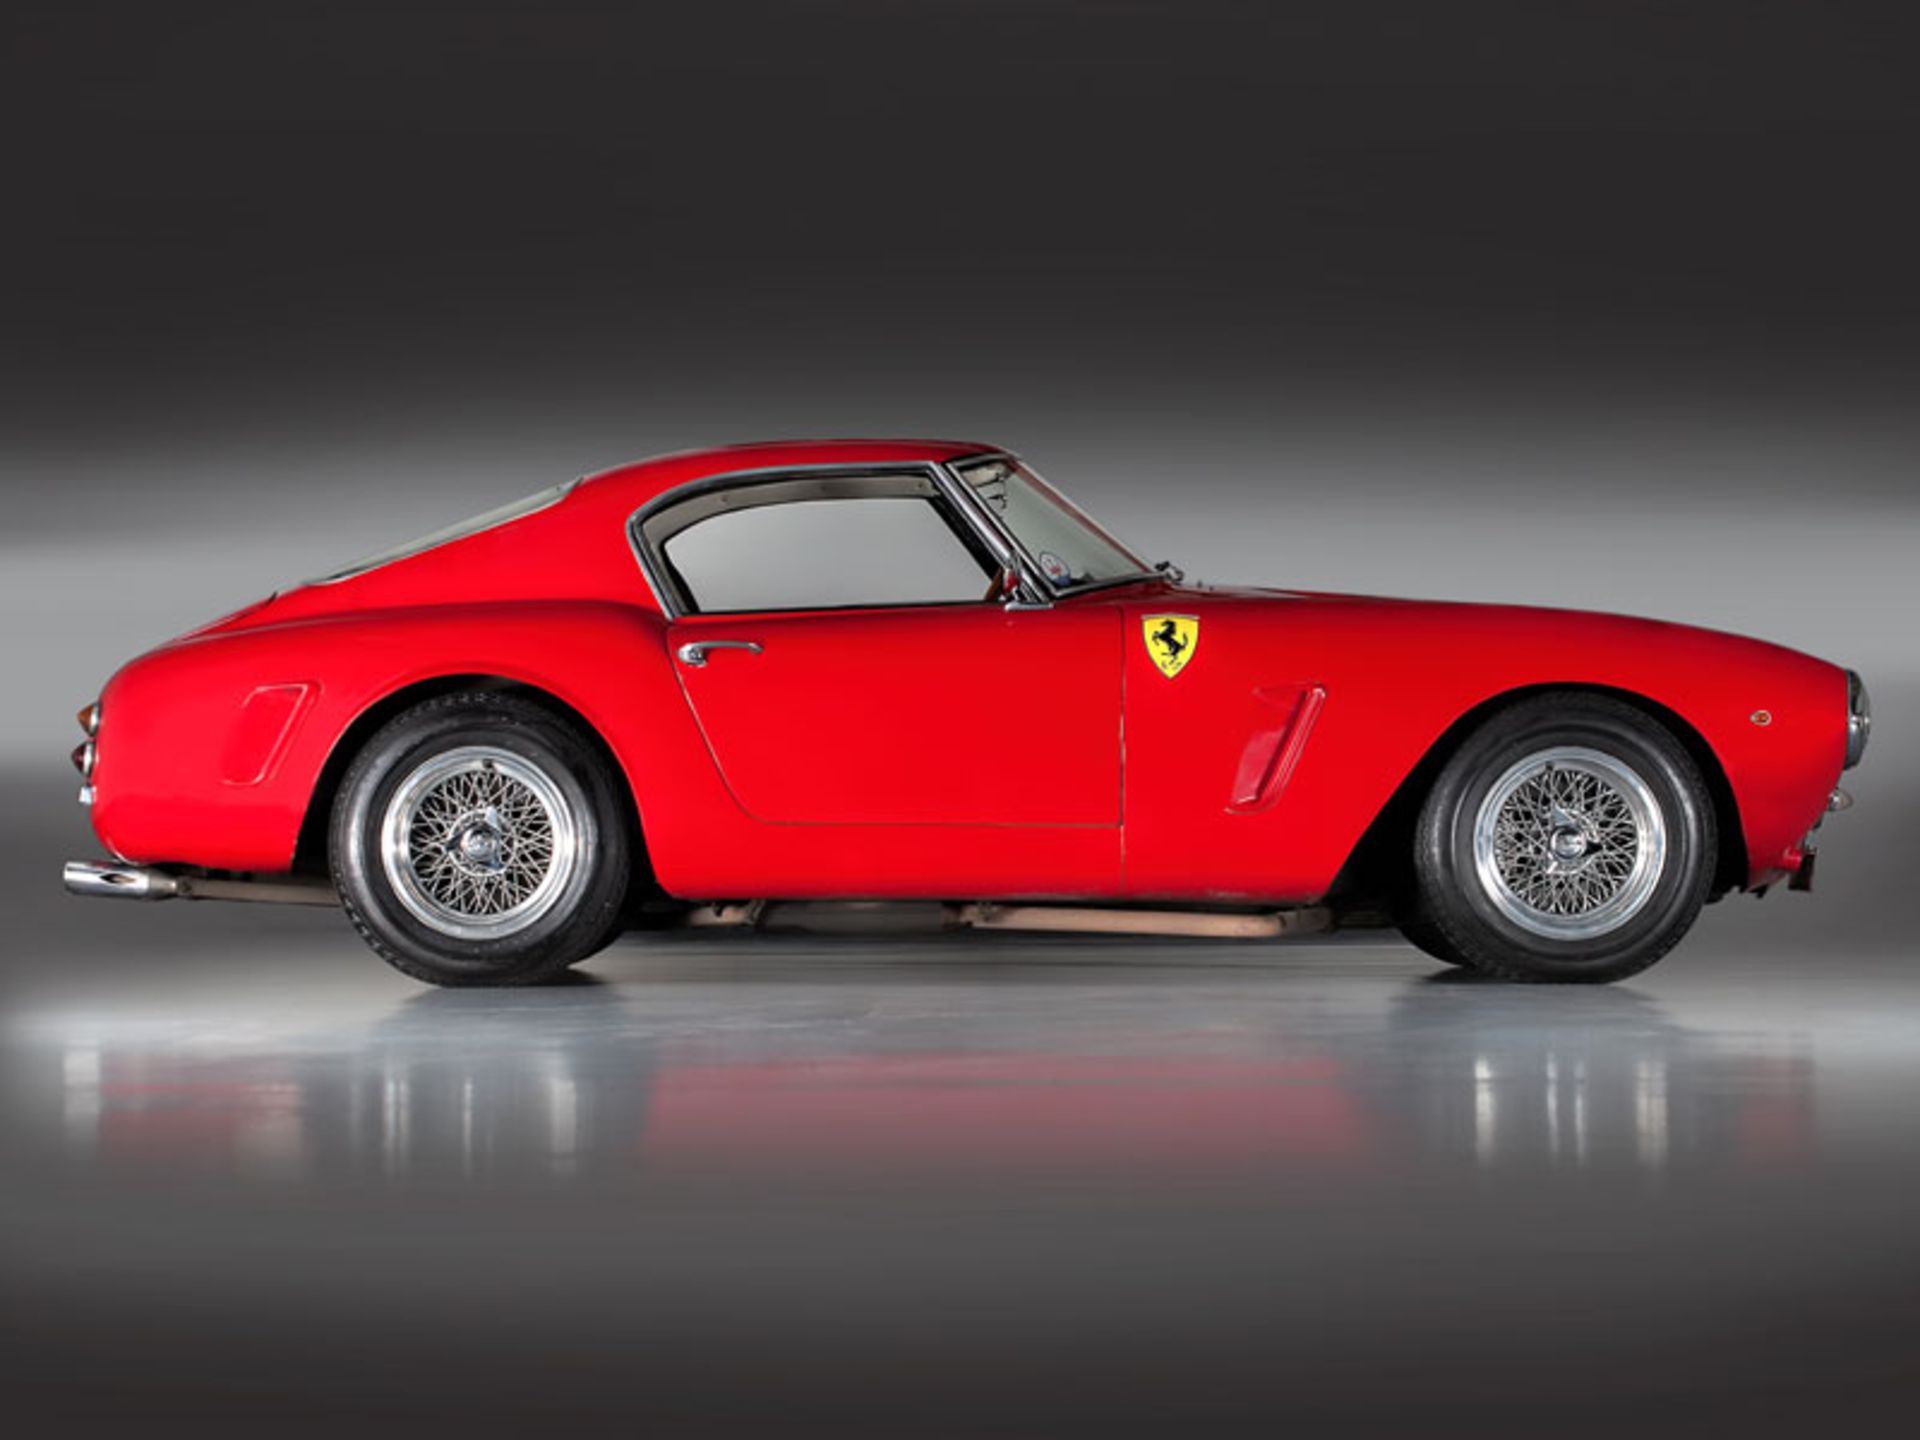 Registering to Bid on the Ferrari 250 GT SWB from the Richard Colton Collection:
- All - Image 4 of 10